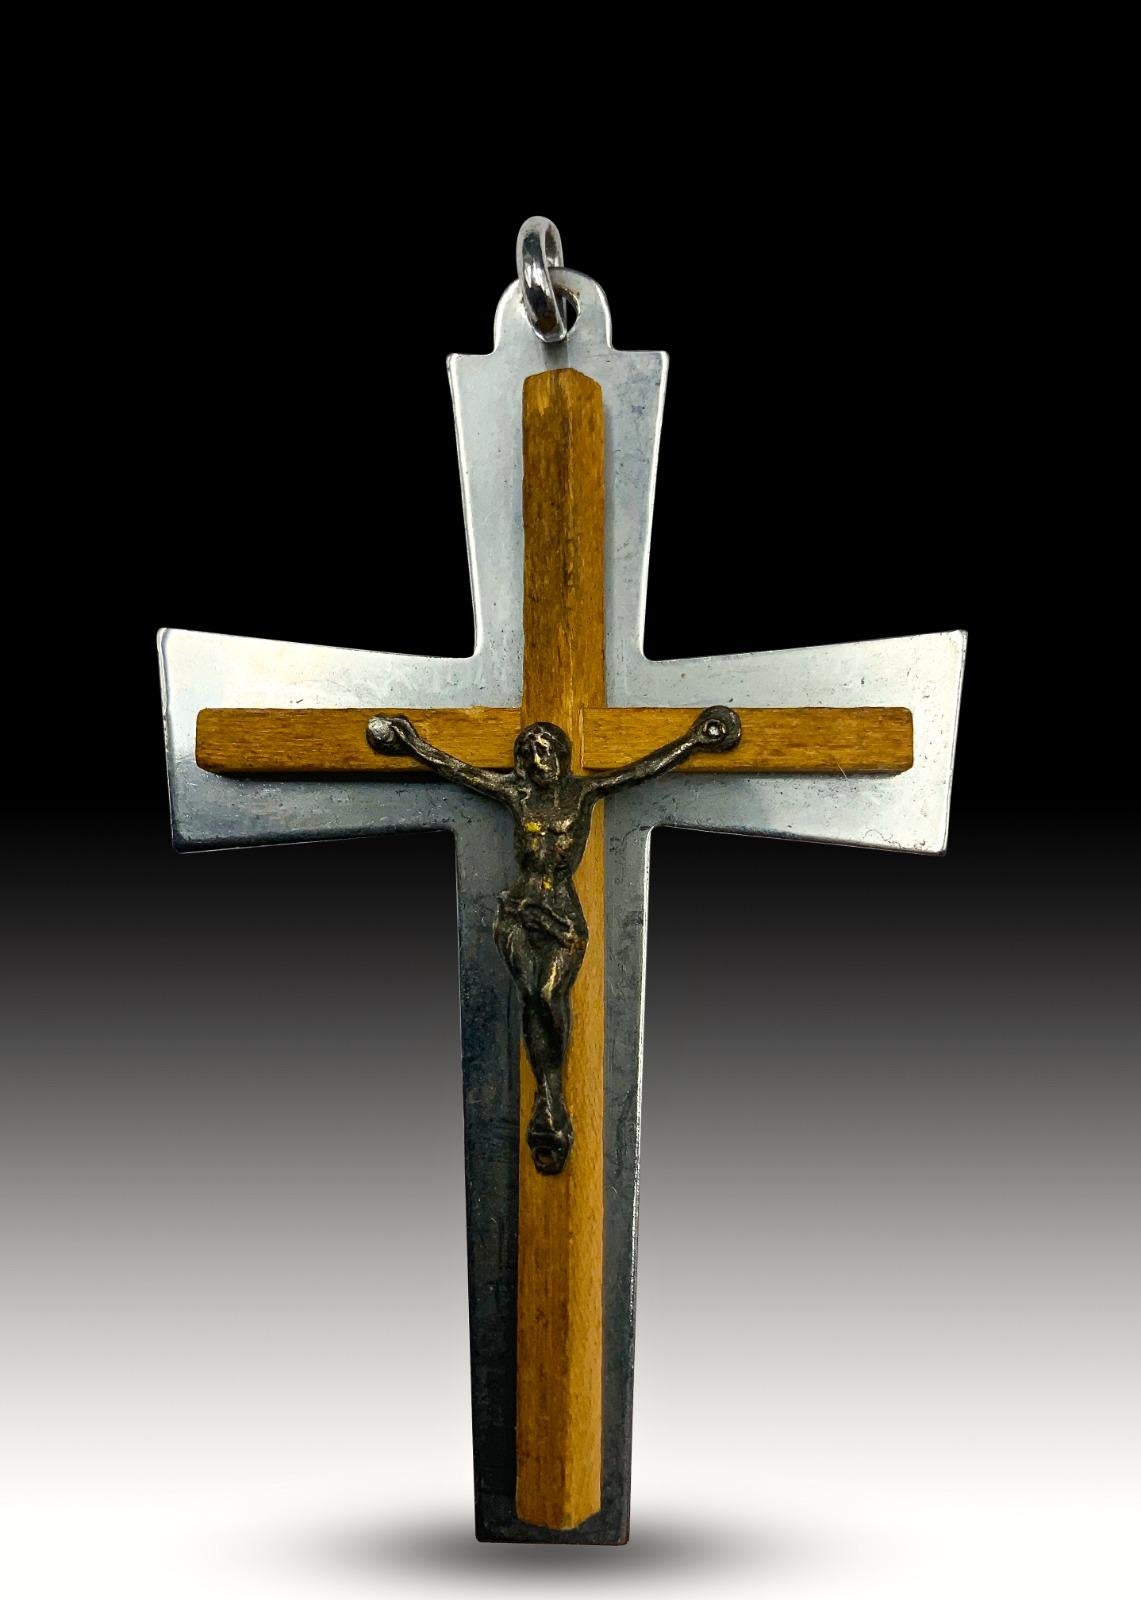 19th Century cross.
Made in olive wood and silver metal. Measures: 8x5 cm.
Good condition.